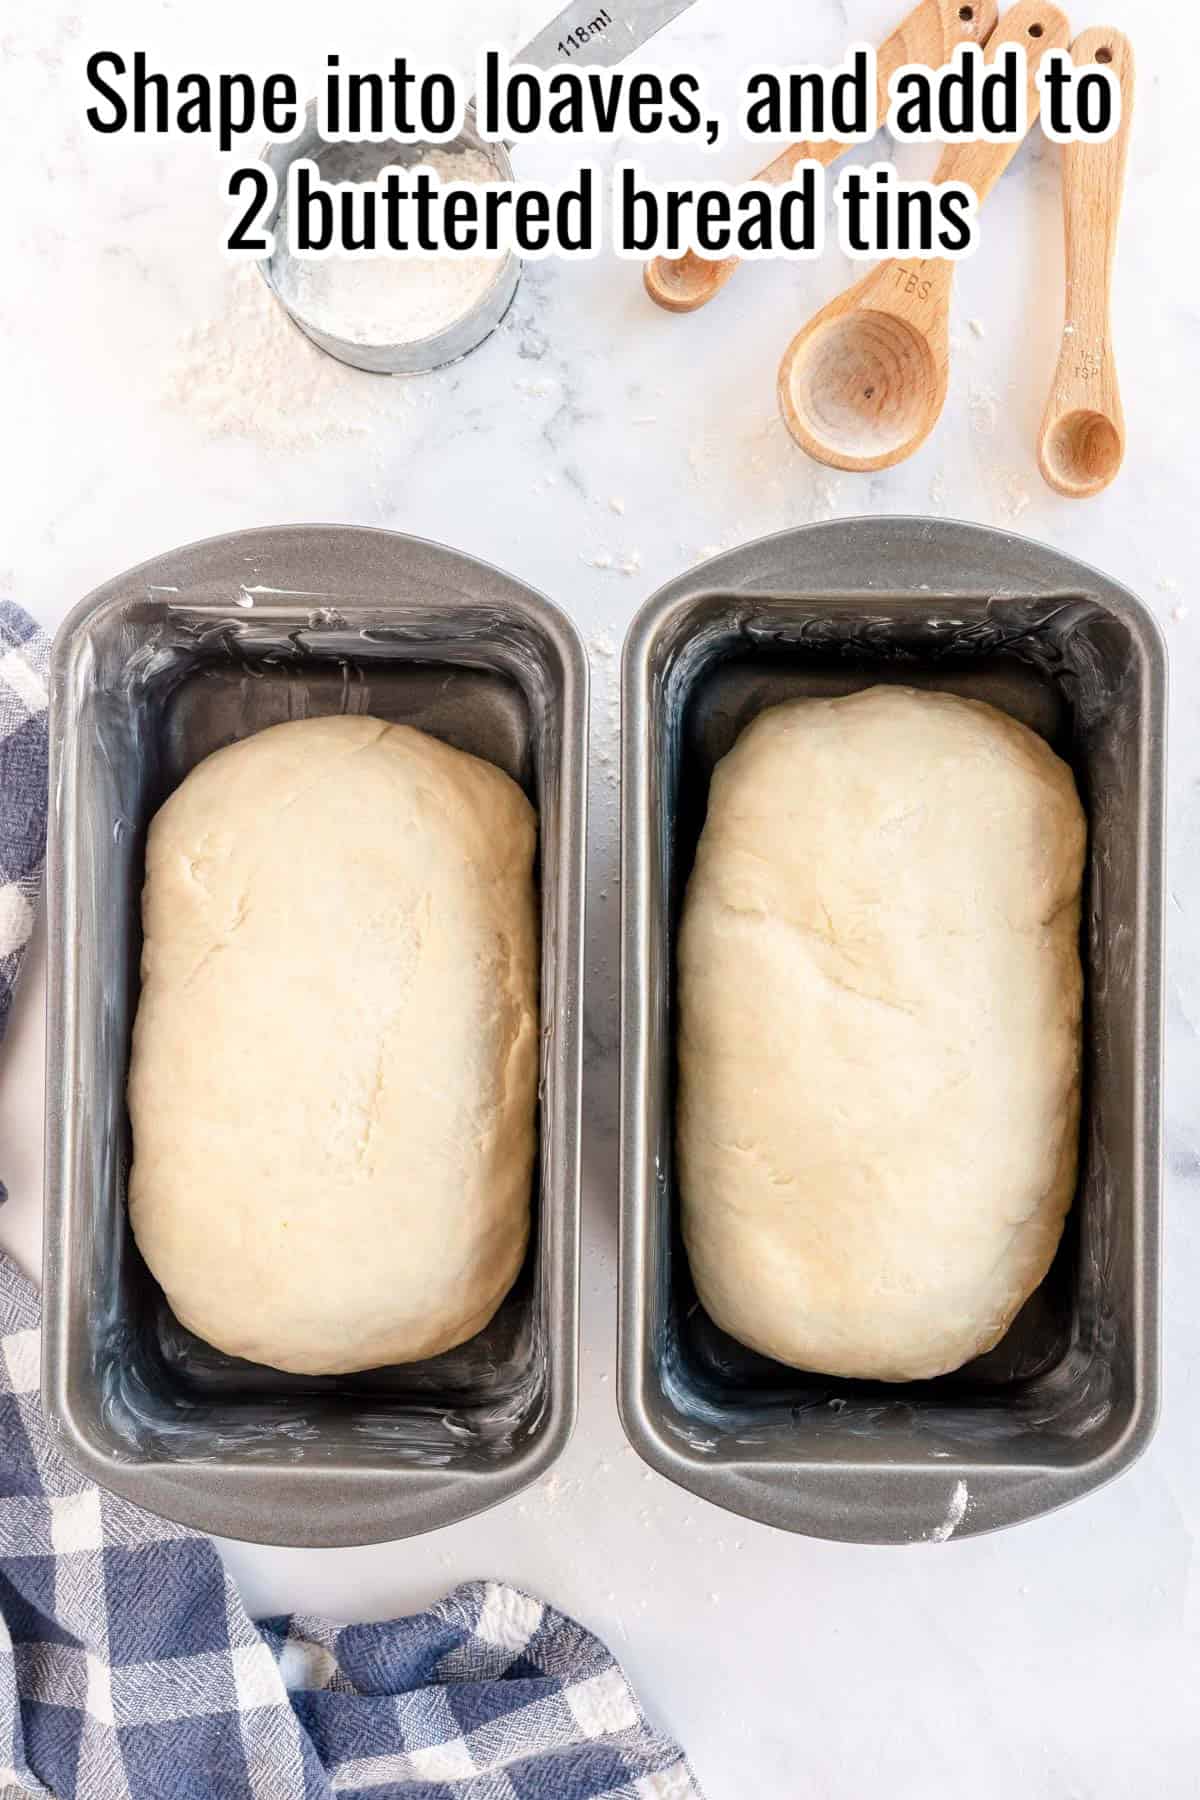 Two unbaked bread loaves in buttered bread tins. Text instructs to shape the dough into loaves and place them in the tins.